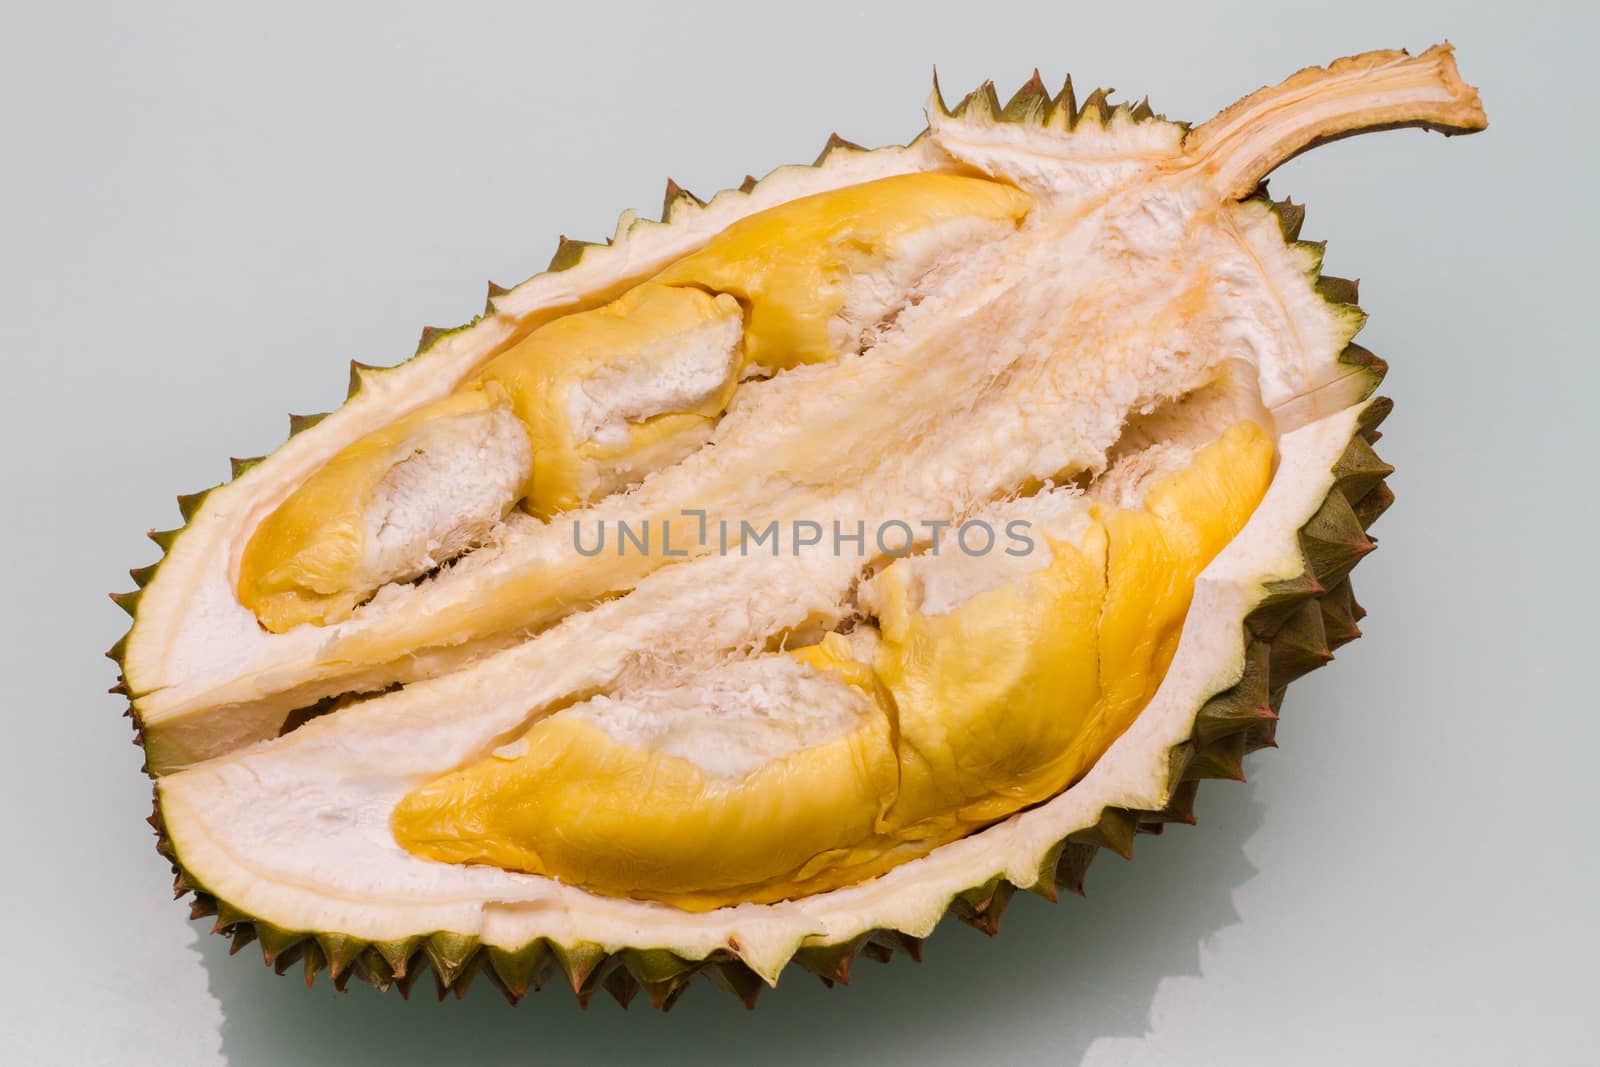 Tropical fruit Malaysia Durian in plain background